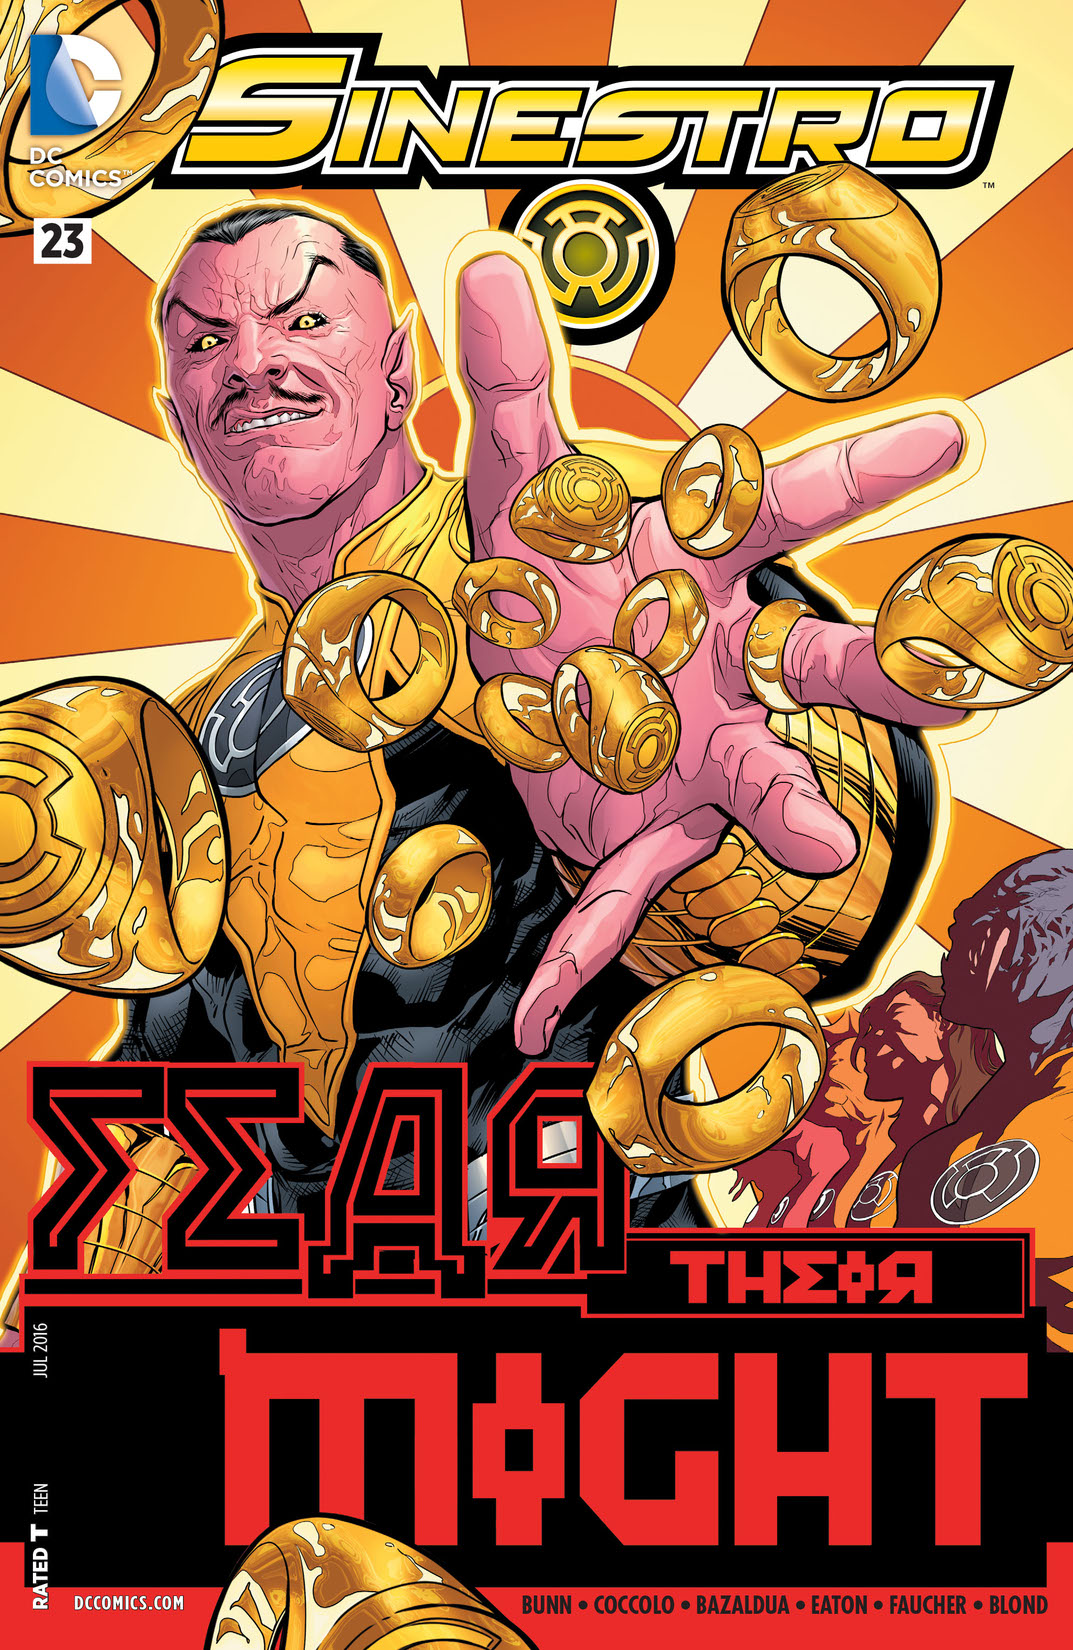 Sinestro #23 preview images